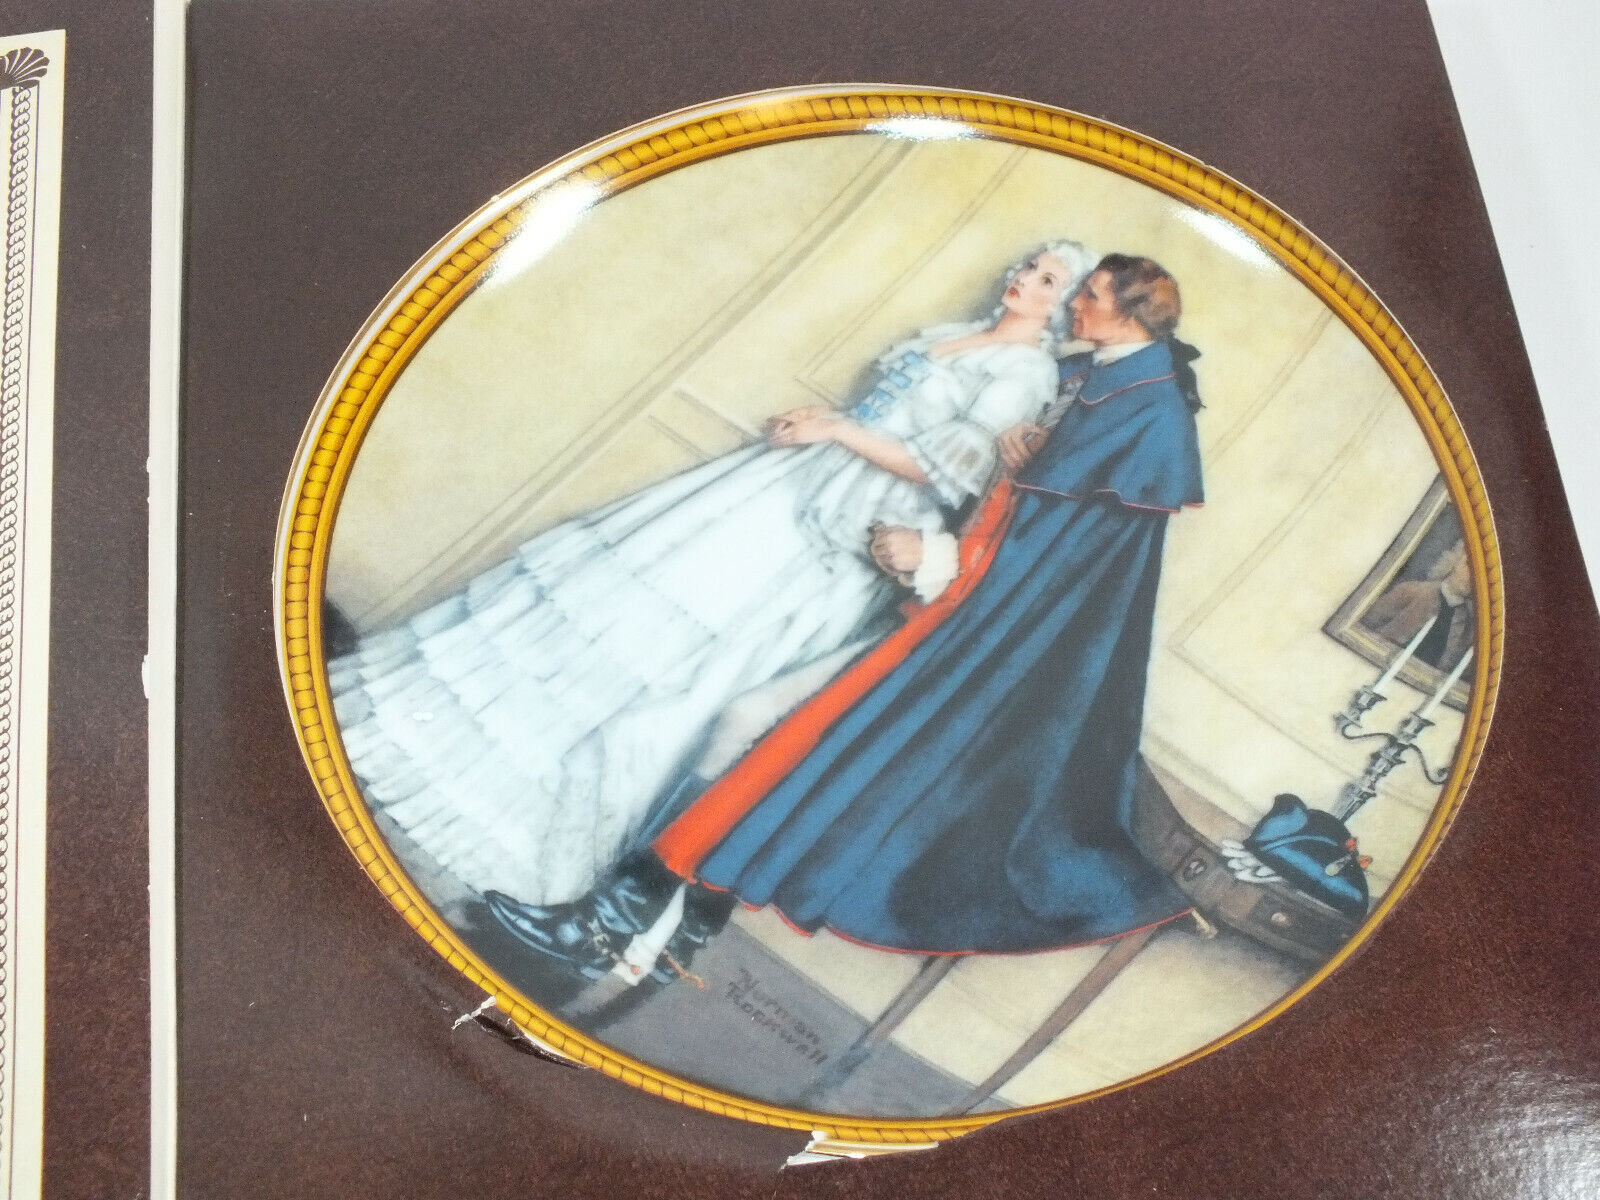 Rockwells Colonials Plate The Rarest Rockwells The Unexpected Proposal Knowles